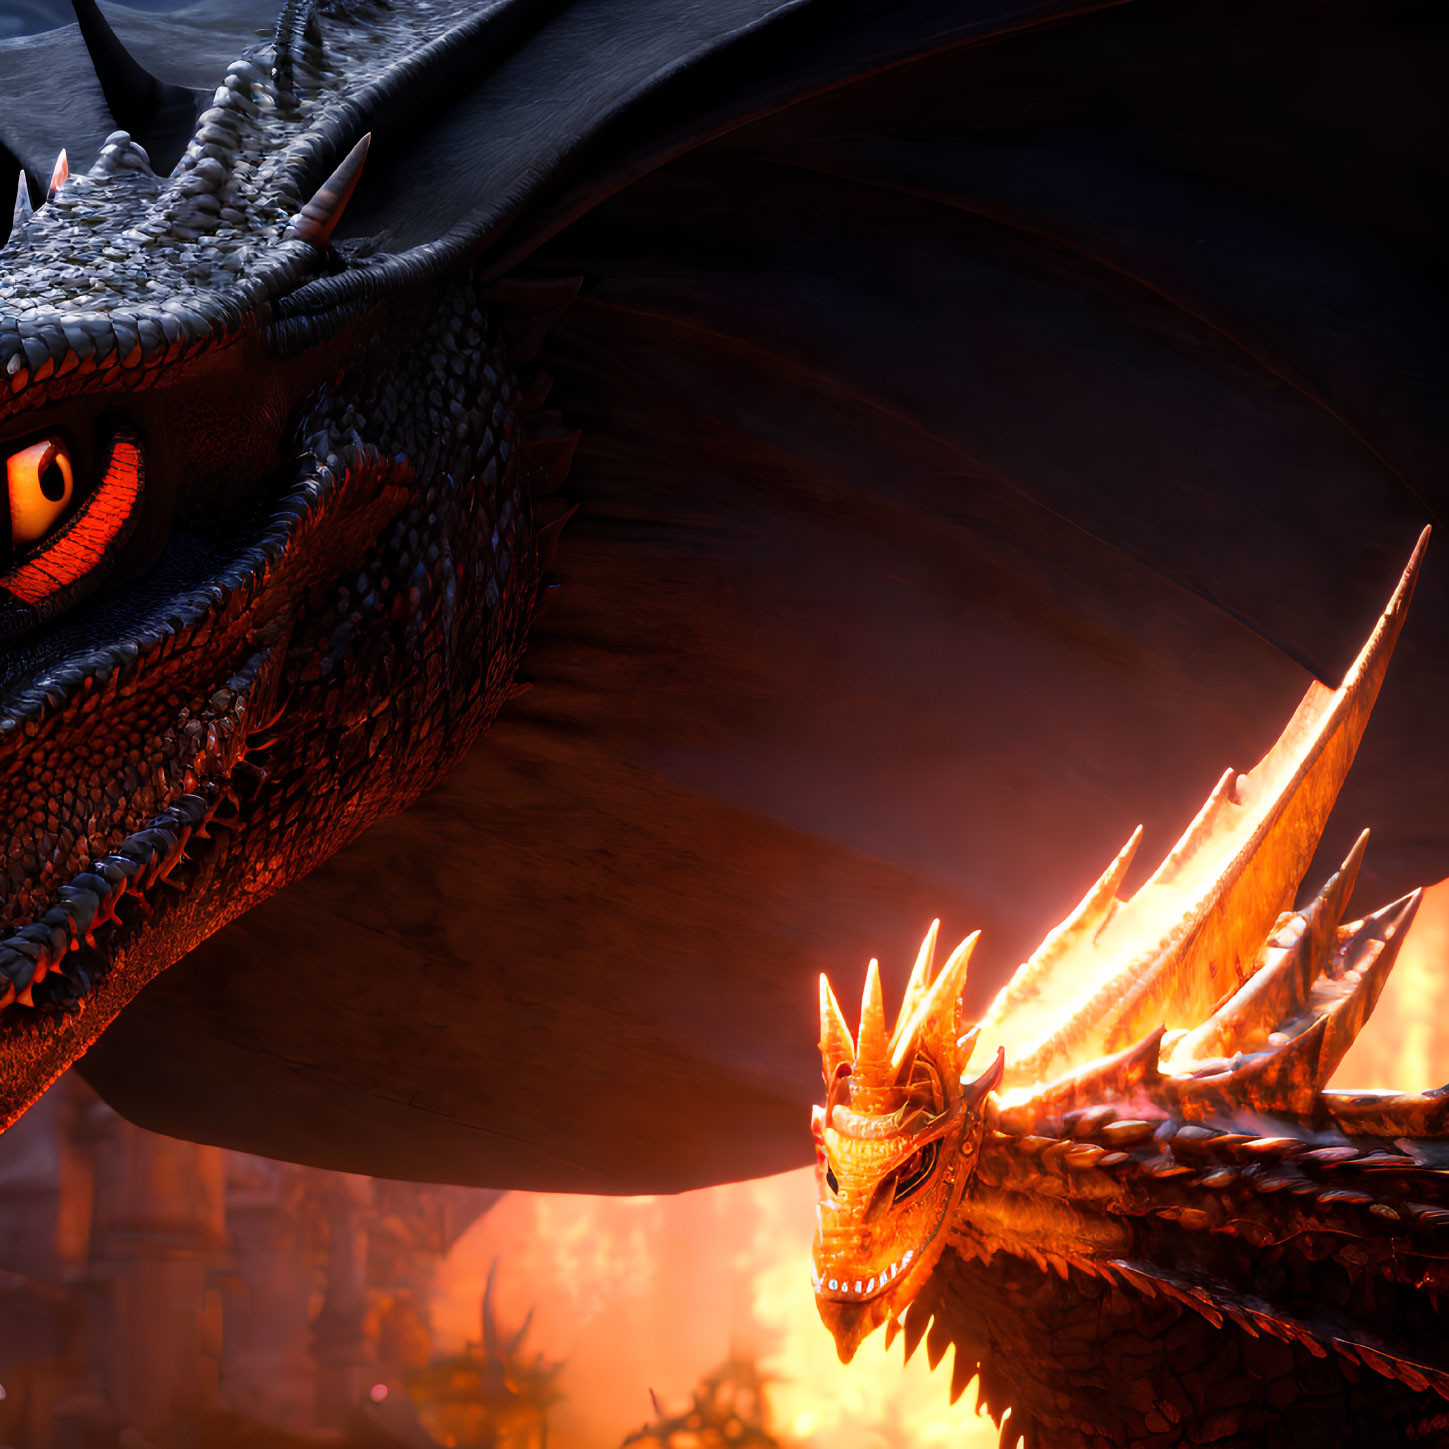 Two Dragons Confront Each Other in Night Scene